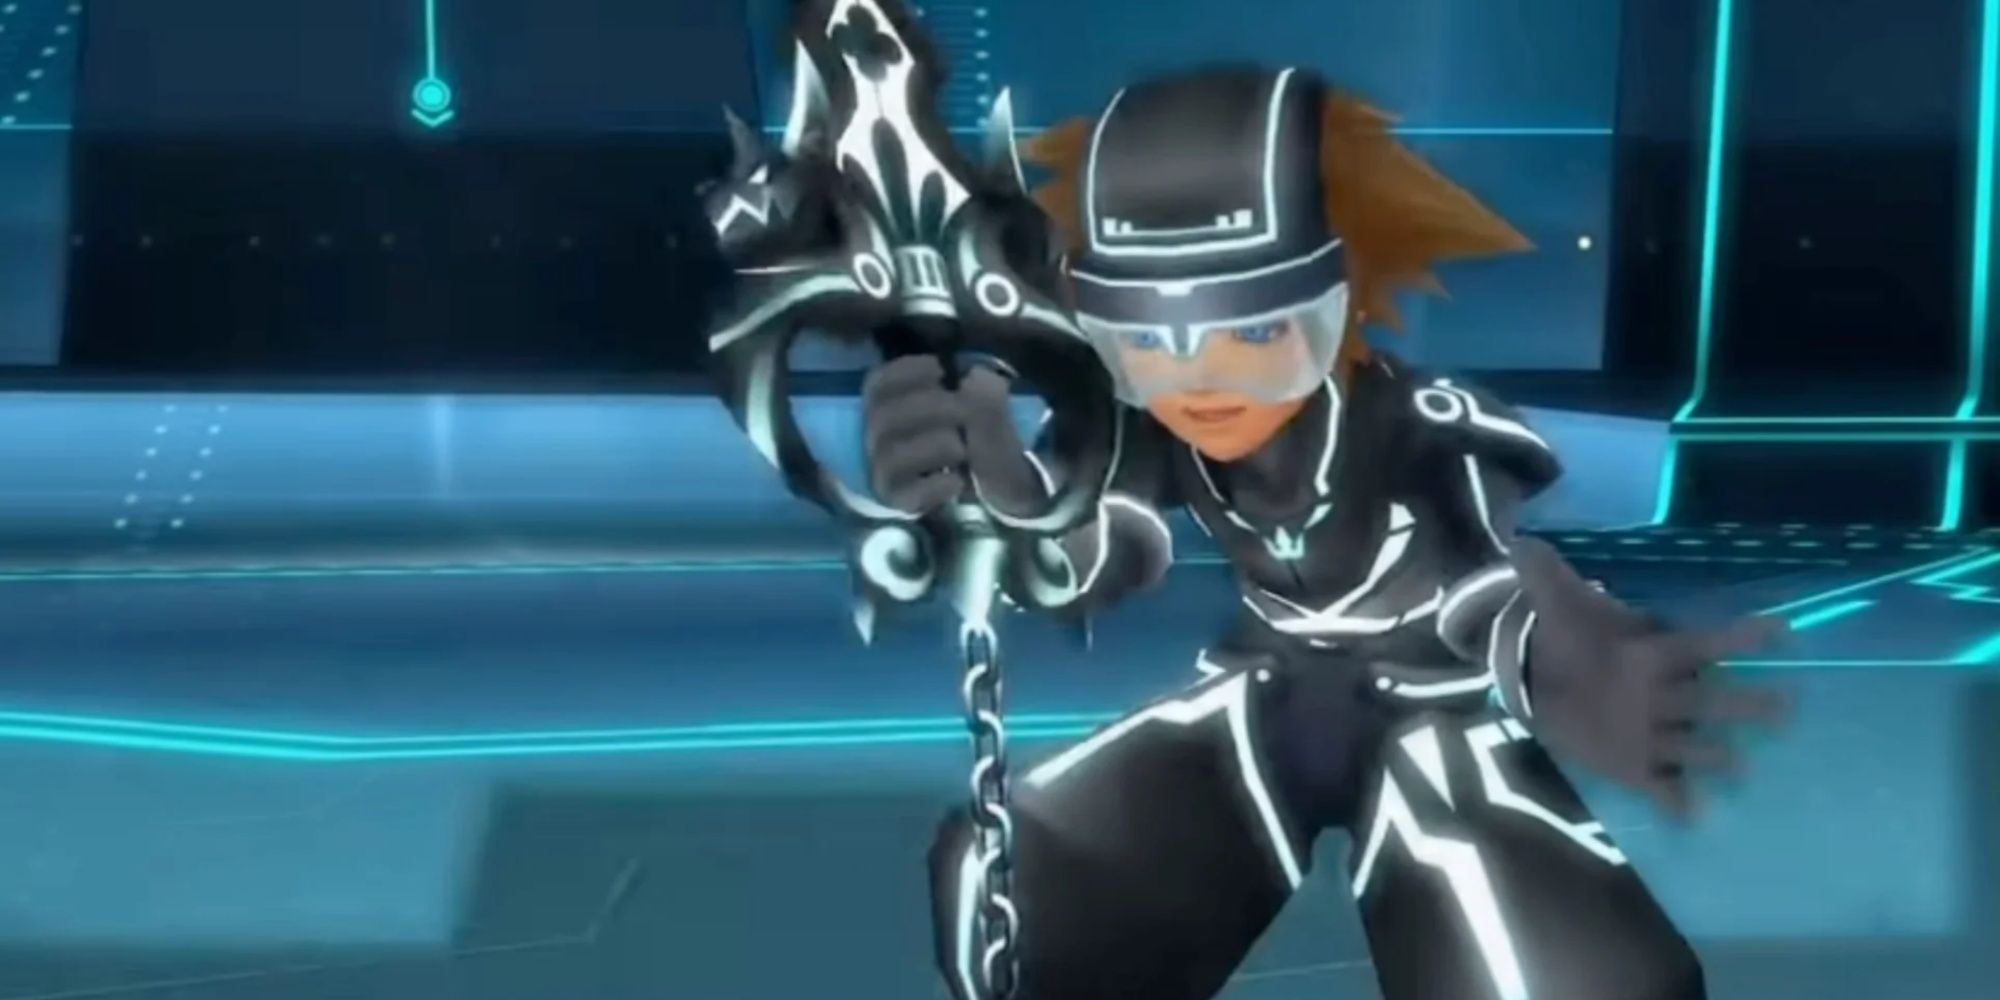 Sora in the Grid Tron outfit in Dream Drop Distance